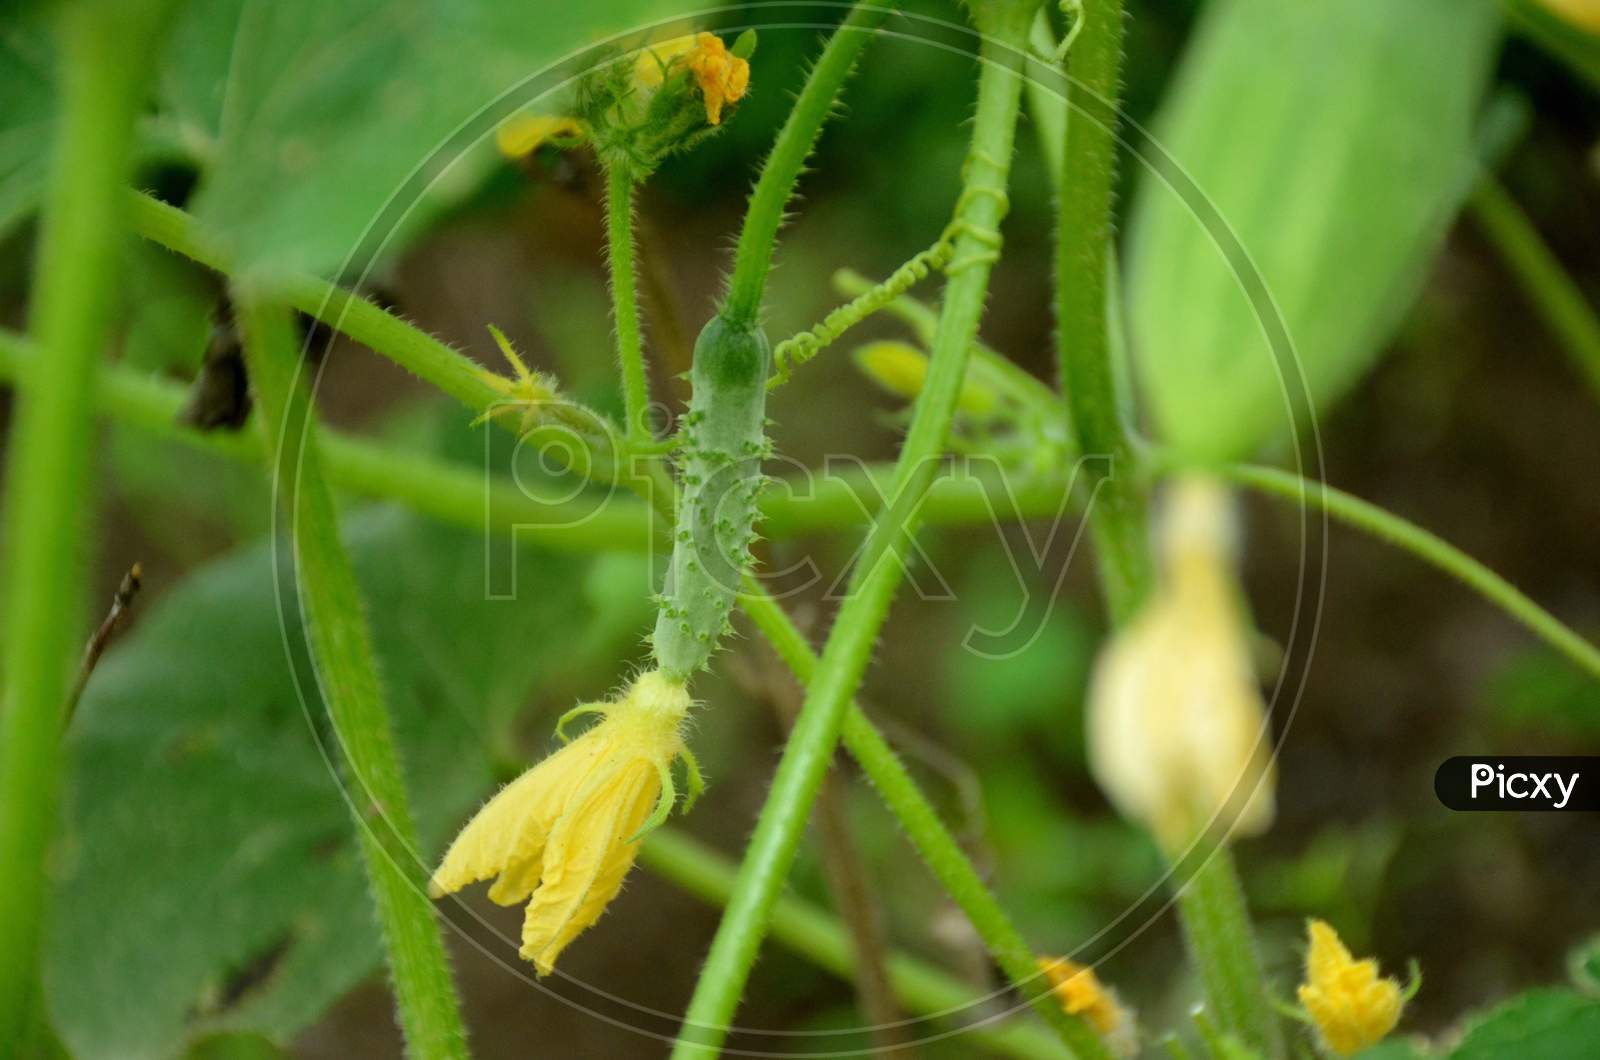 ripe cucumber on the vine with yellow flowers and leaves.